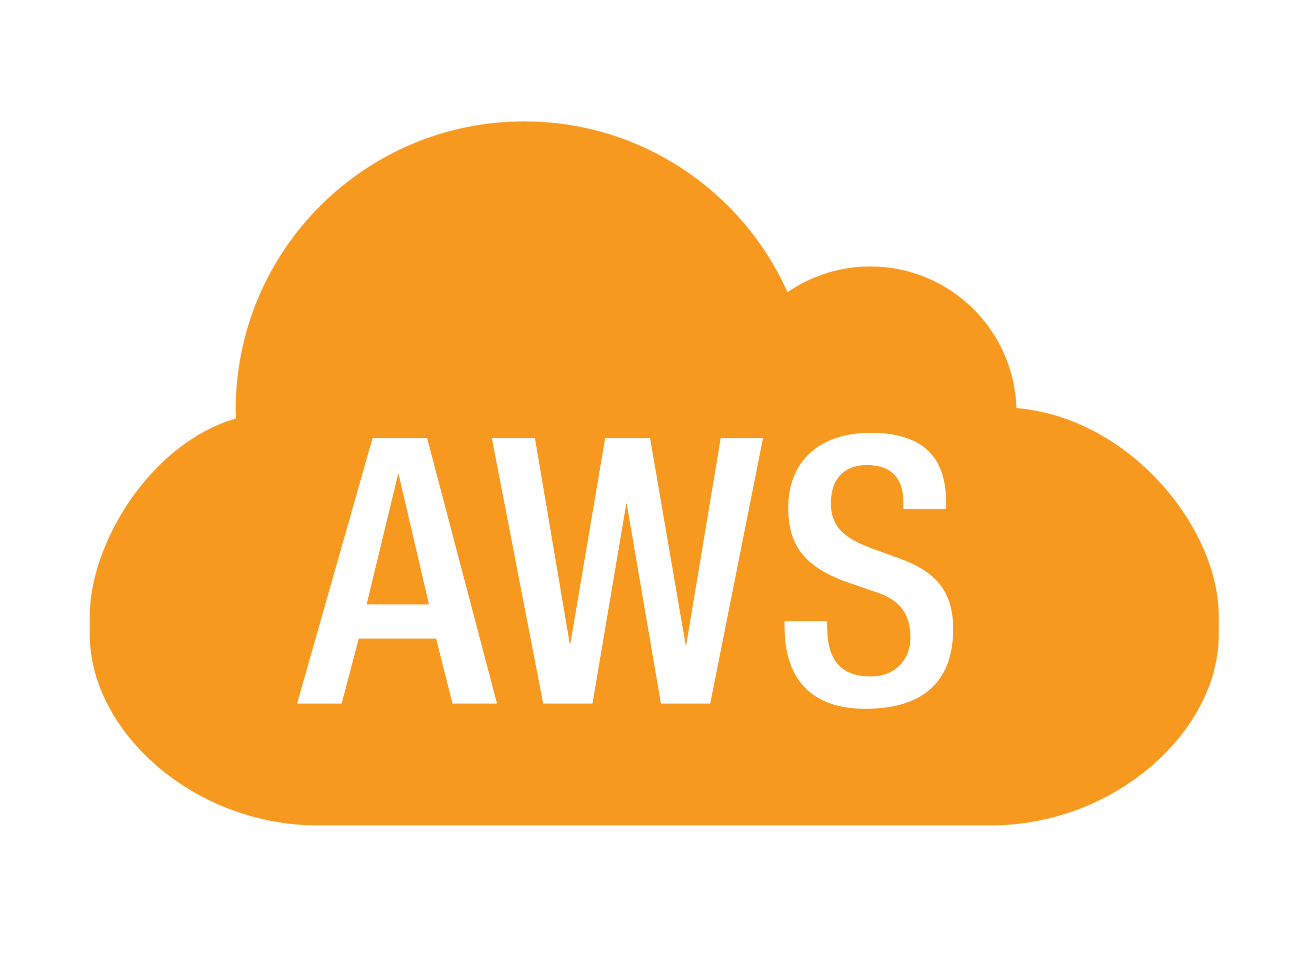 Going Cloud Native with Amazon Web Services Tutorial on